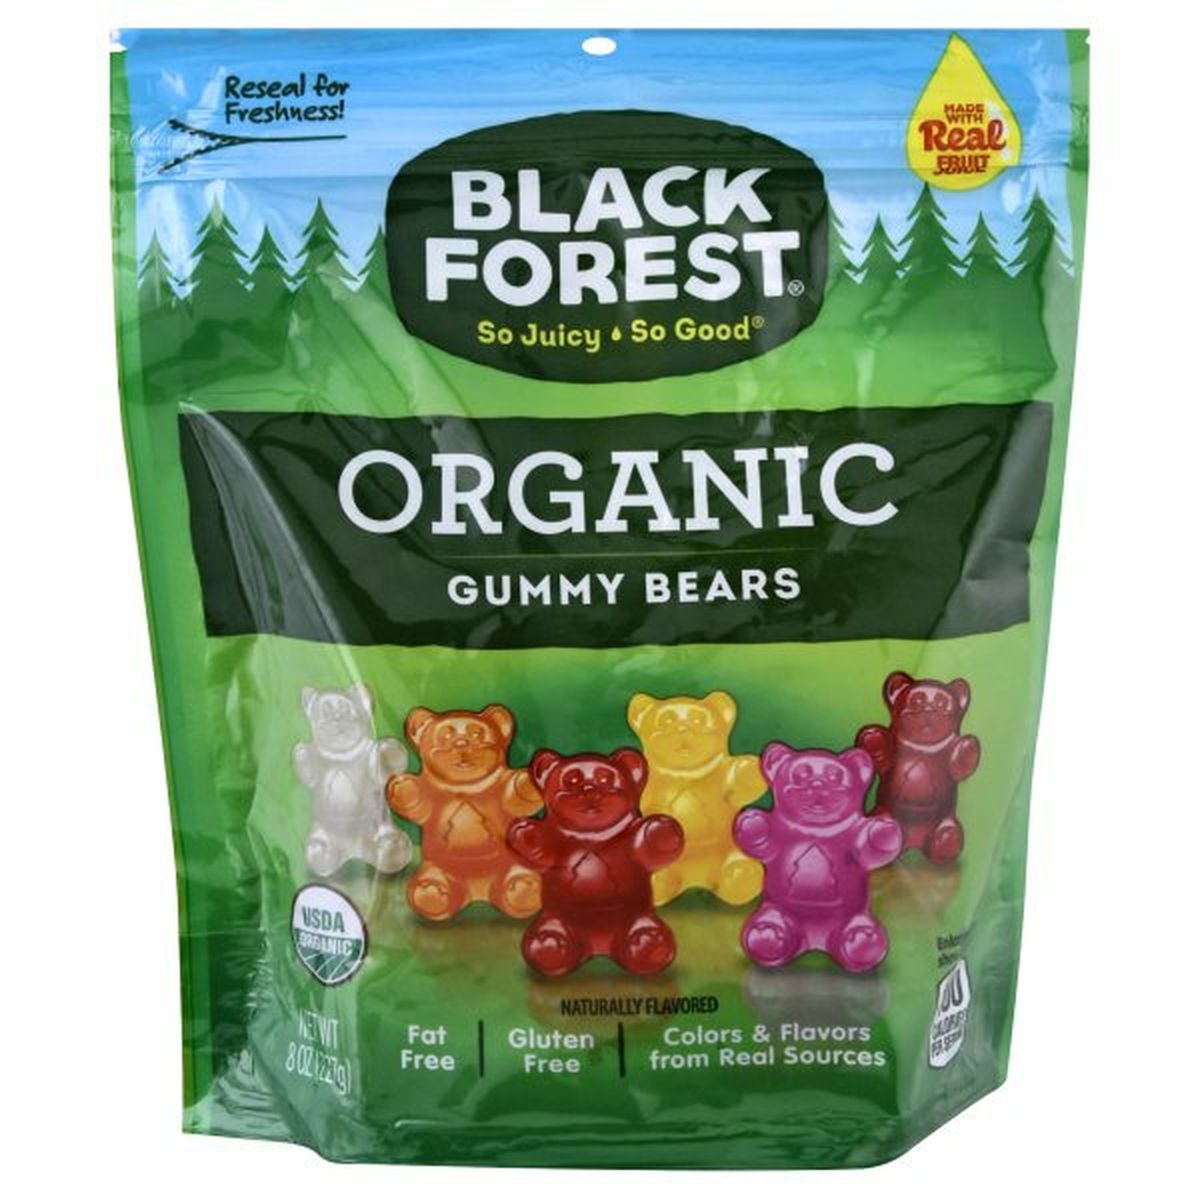 Calories in Black Forest Gummy Bears, Organic